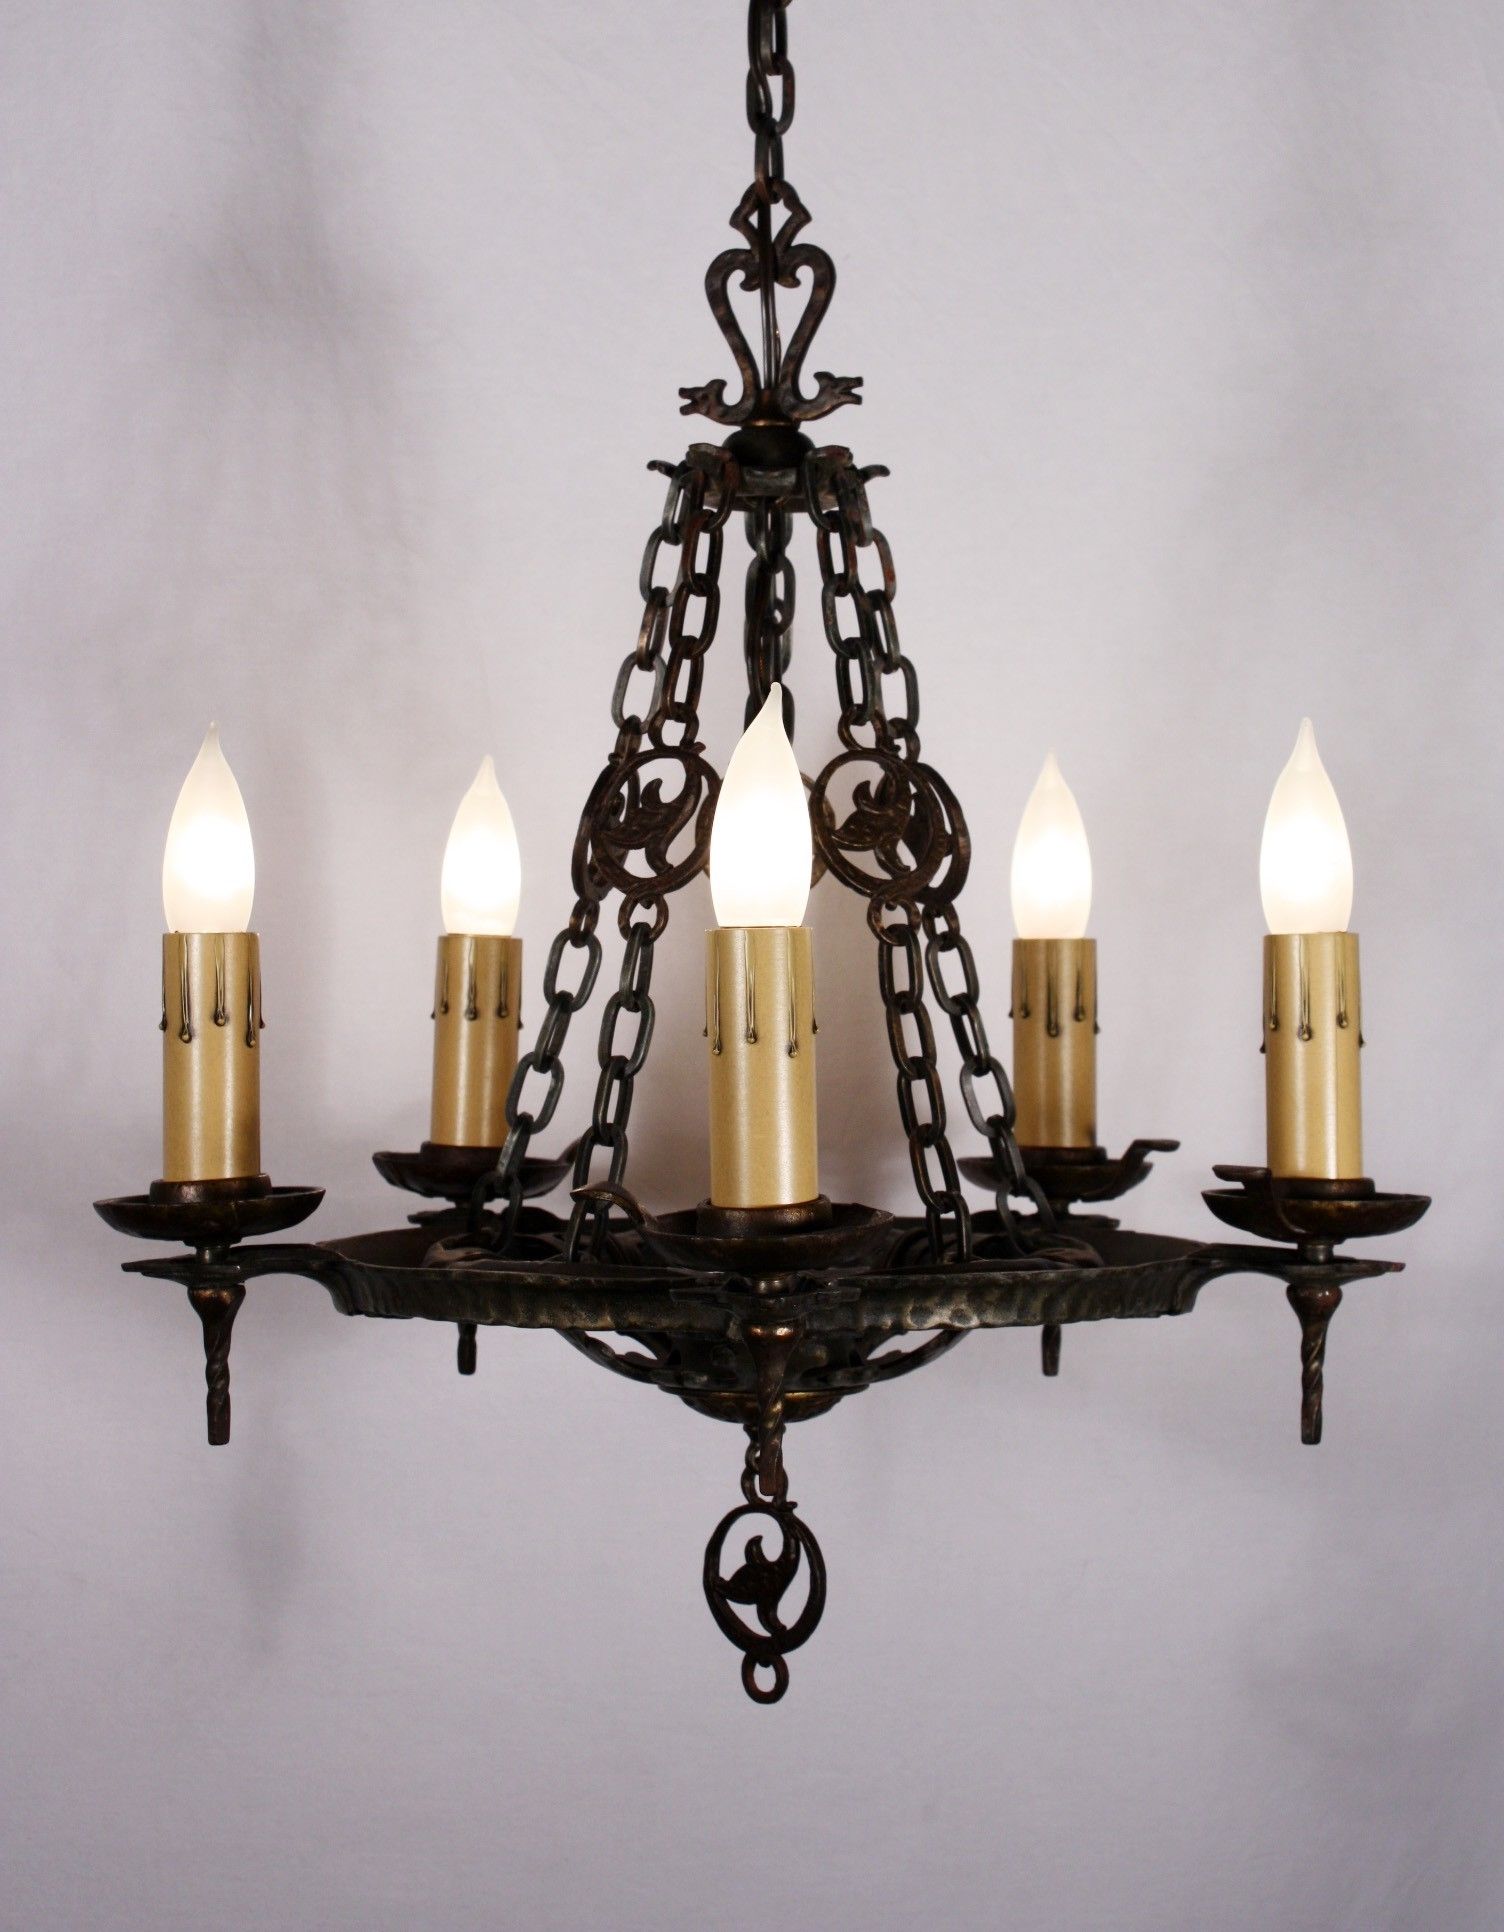 2017 Cast Iron Chandelier Pertaining To Antique Five Light Cast Iron Tudor Chandelier, Signed Virden Company (View 9 of 15)